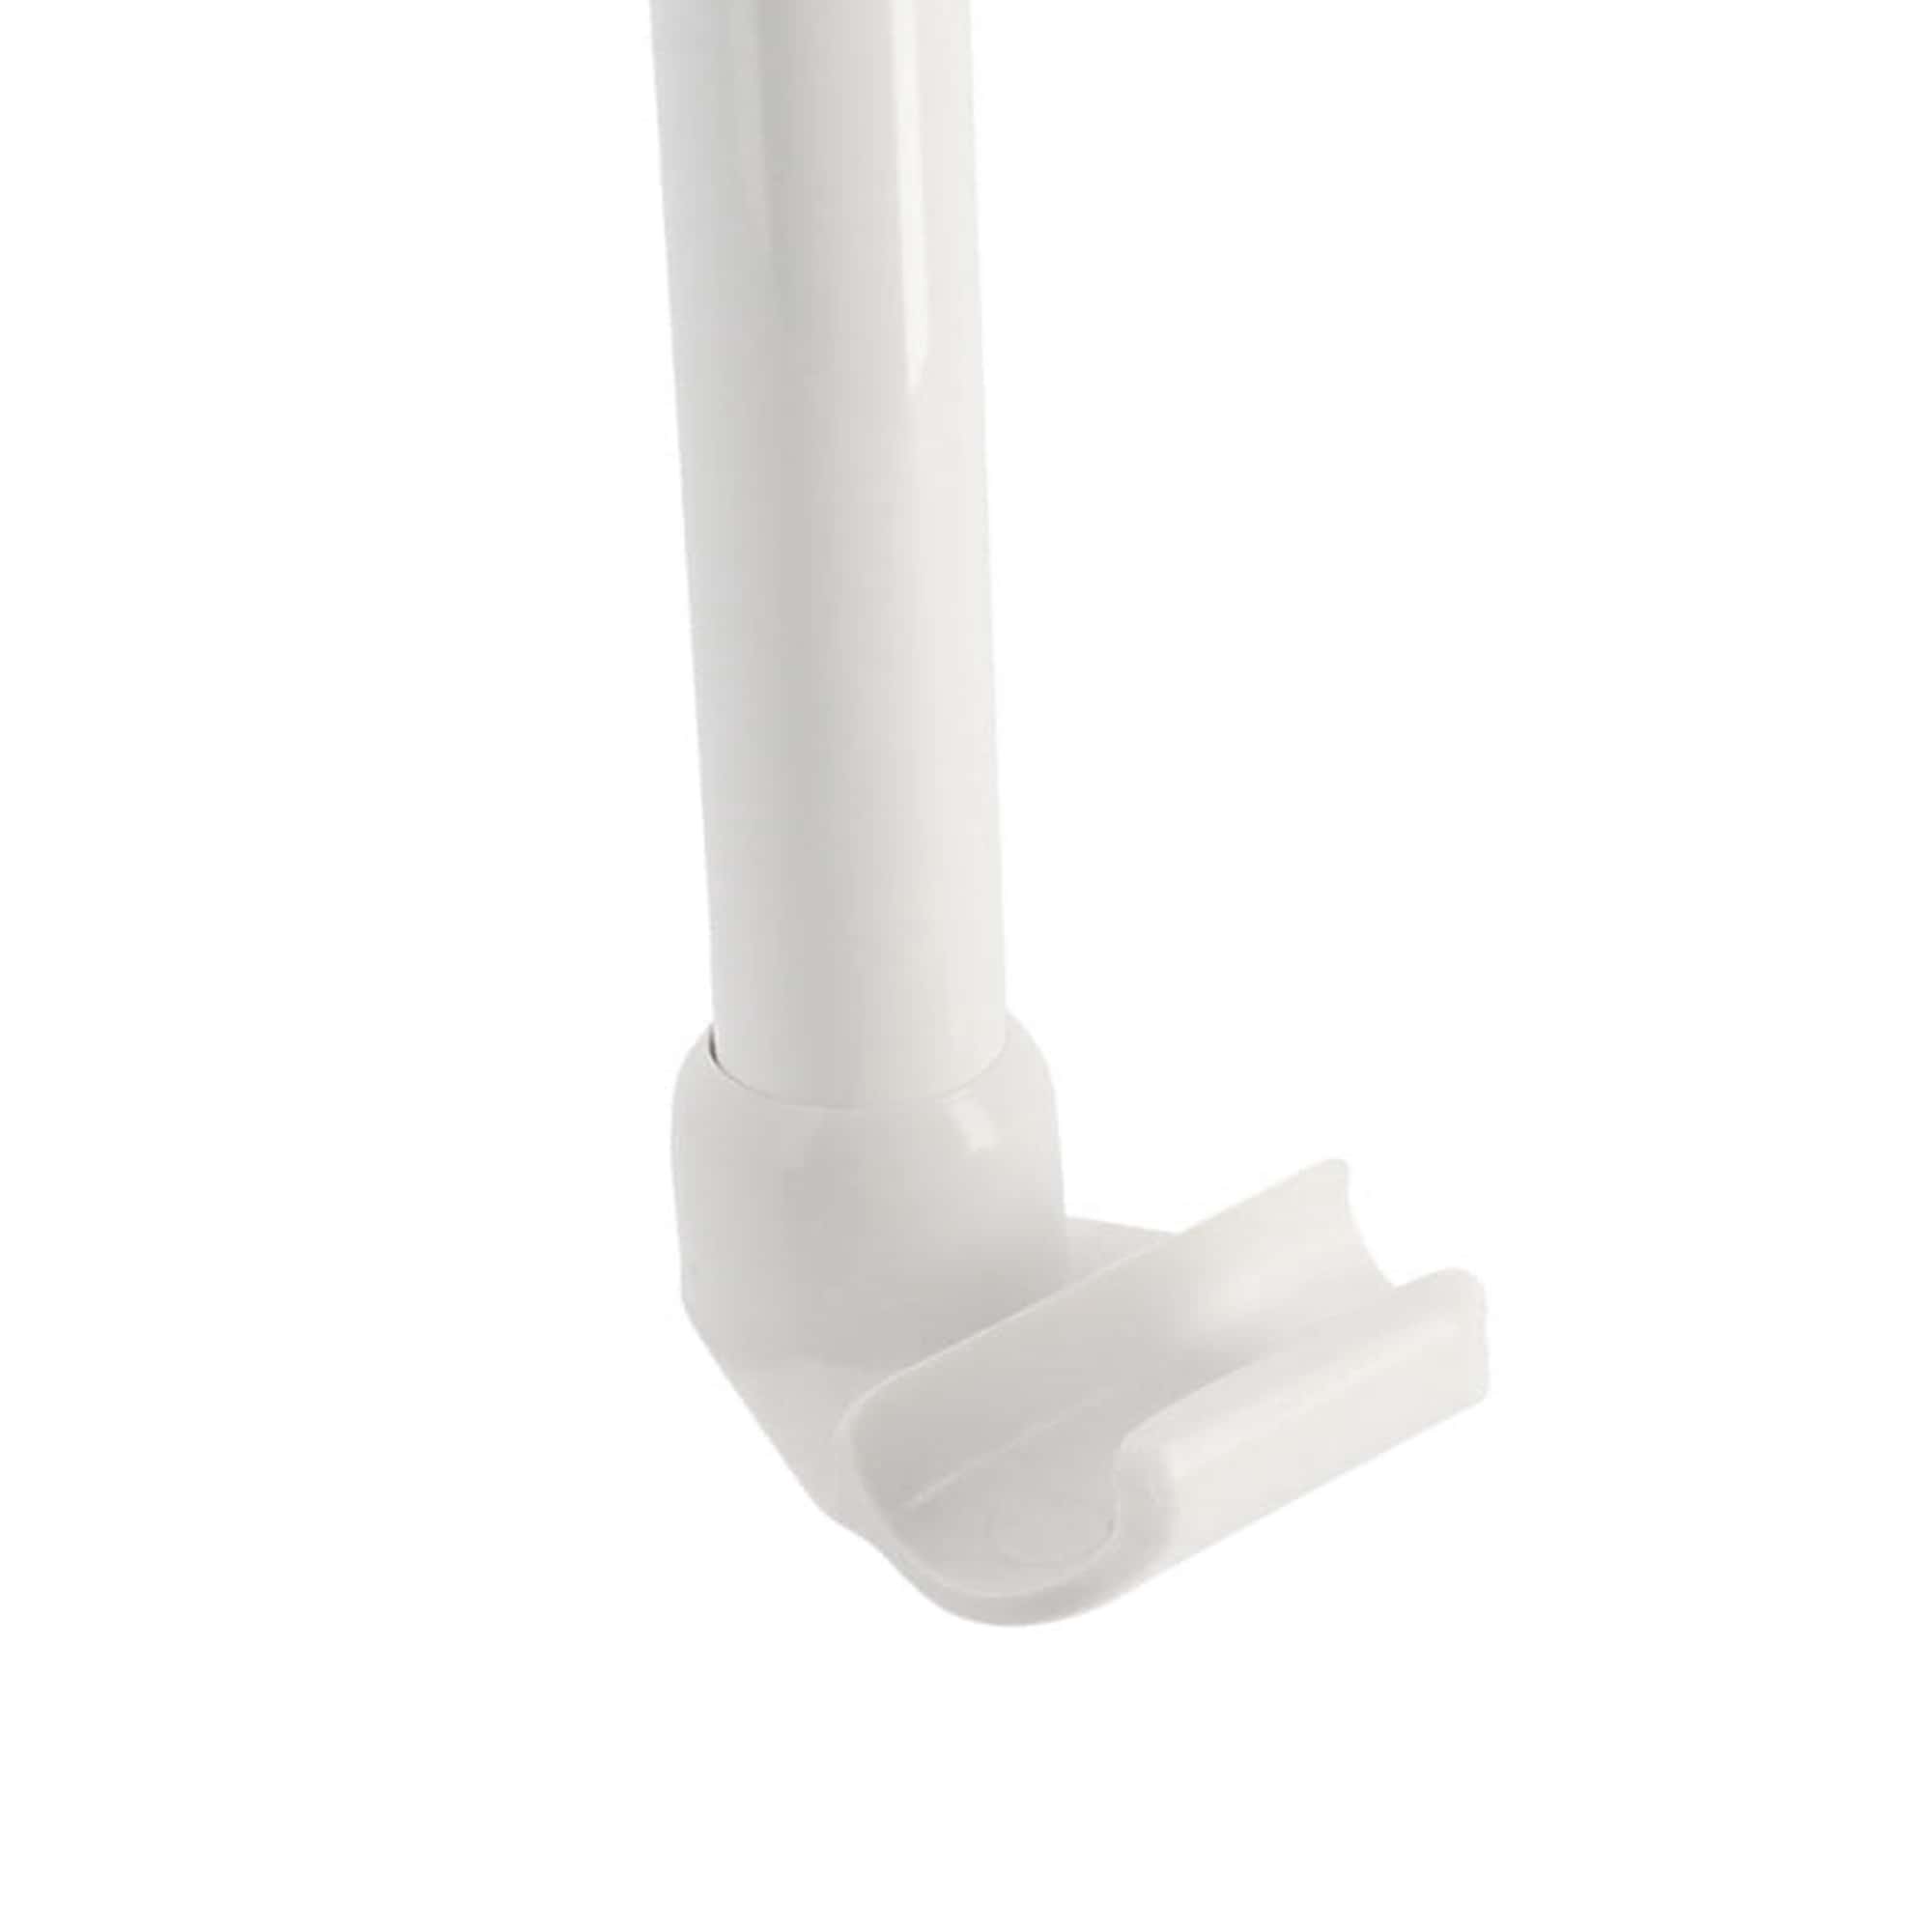 Close-up of the bottom attachment of the white ceiling support rod with a clip for shower rail (2)